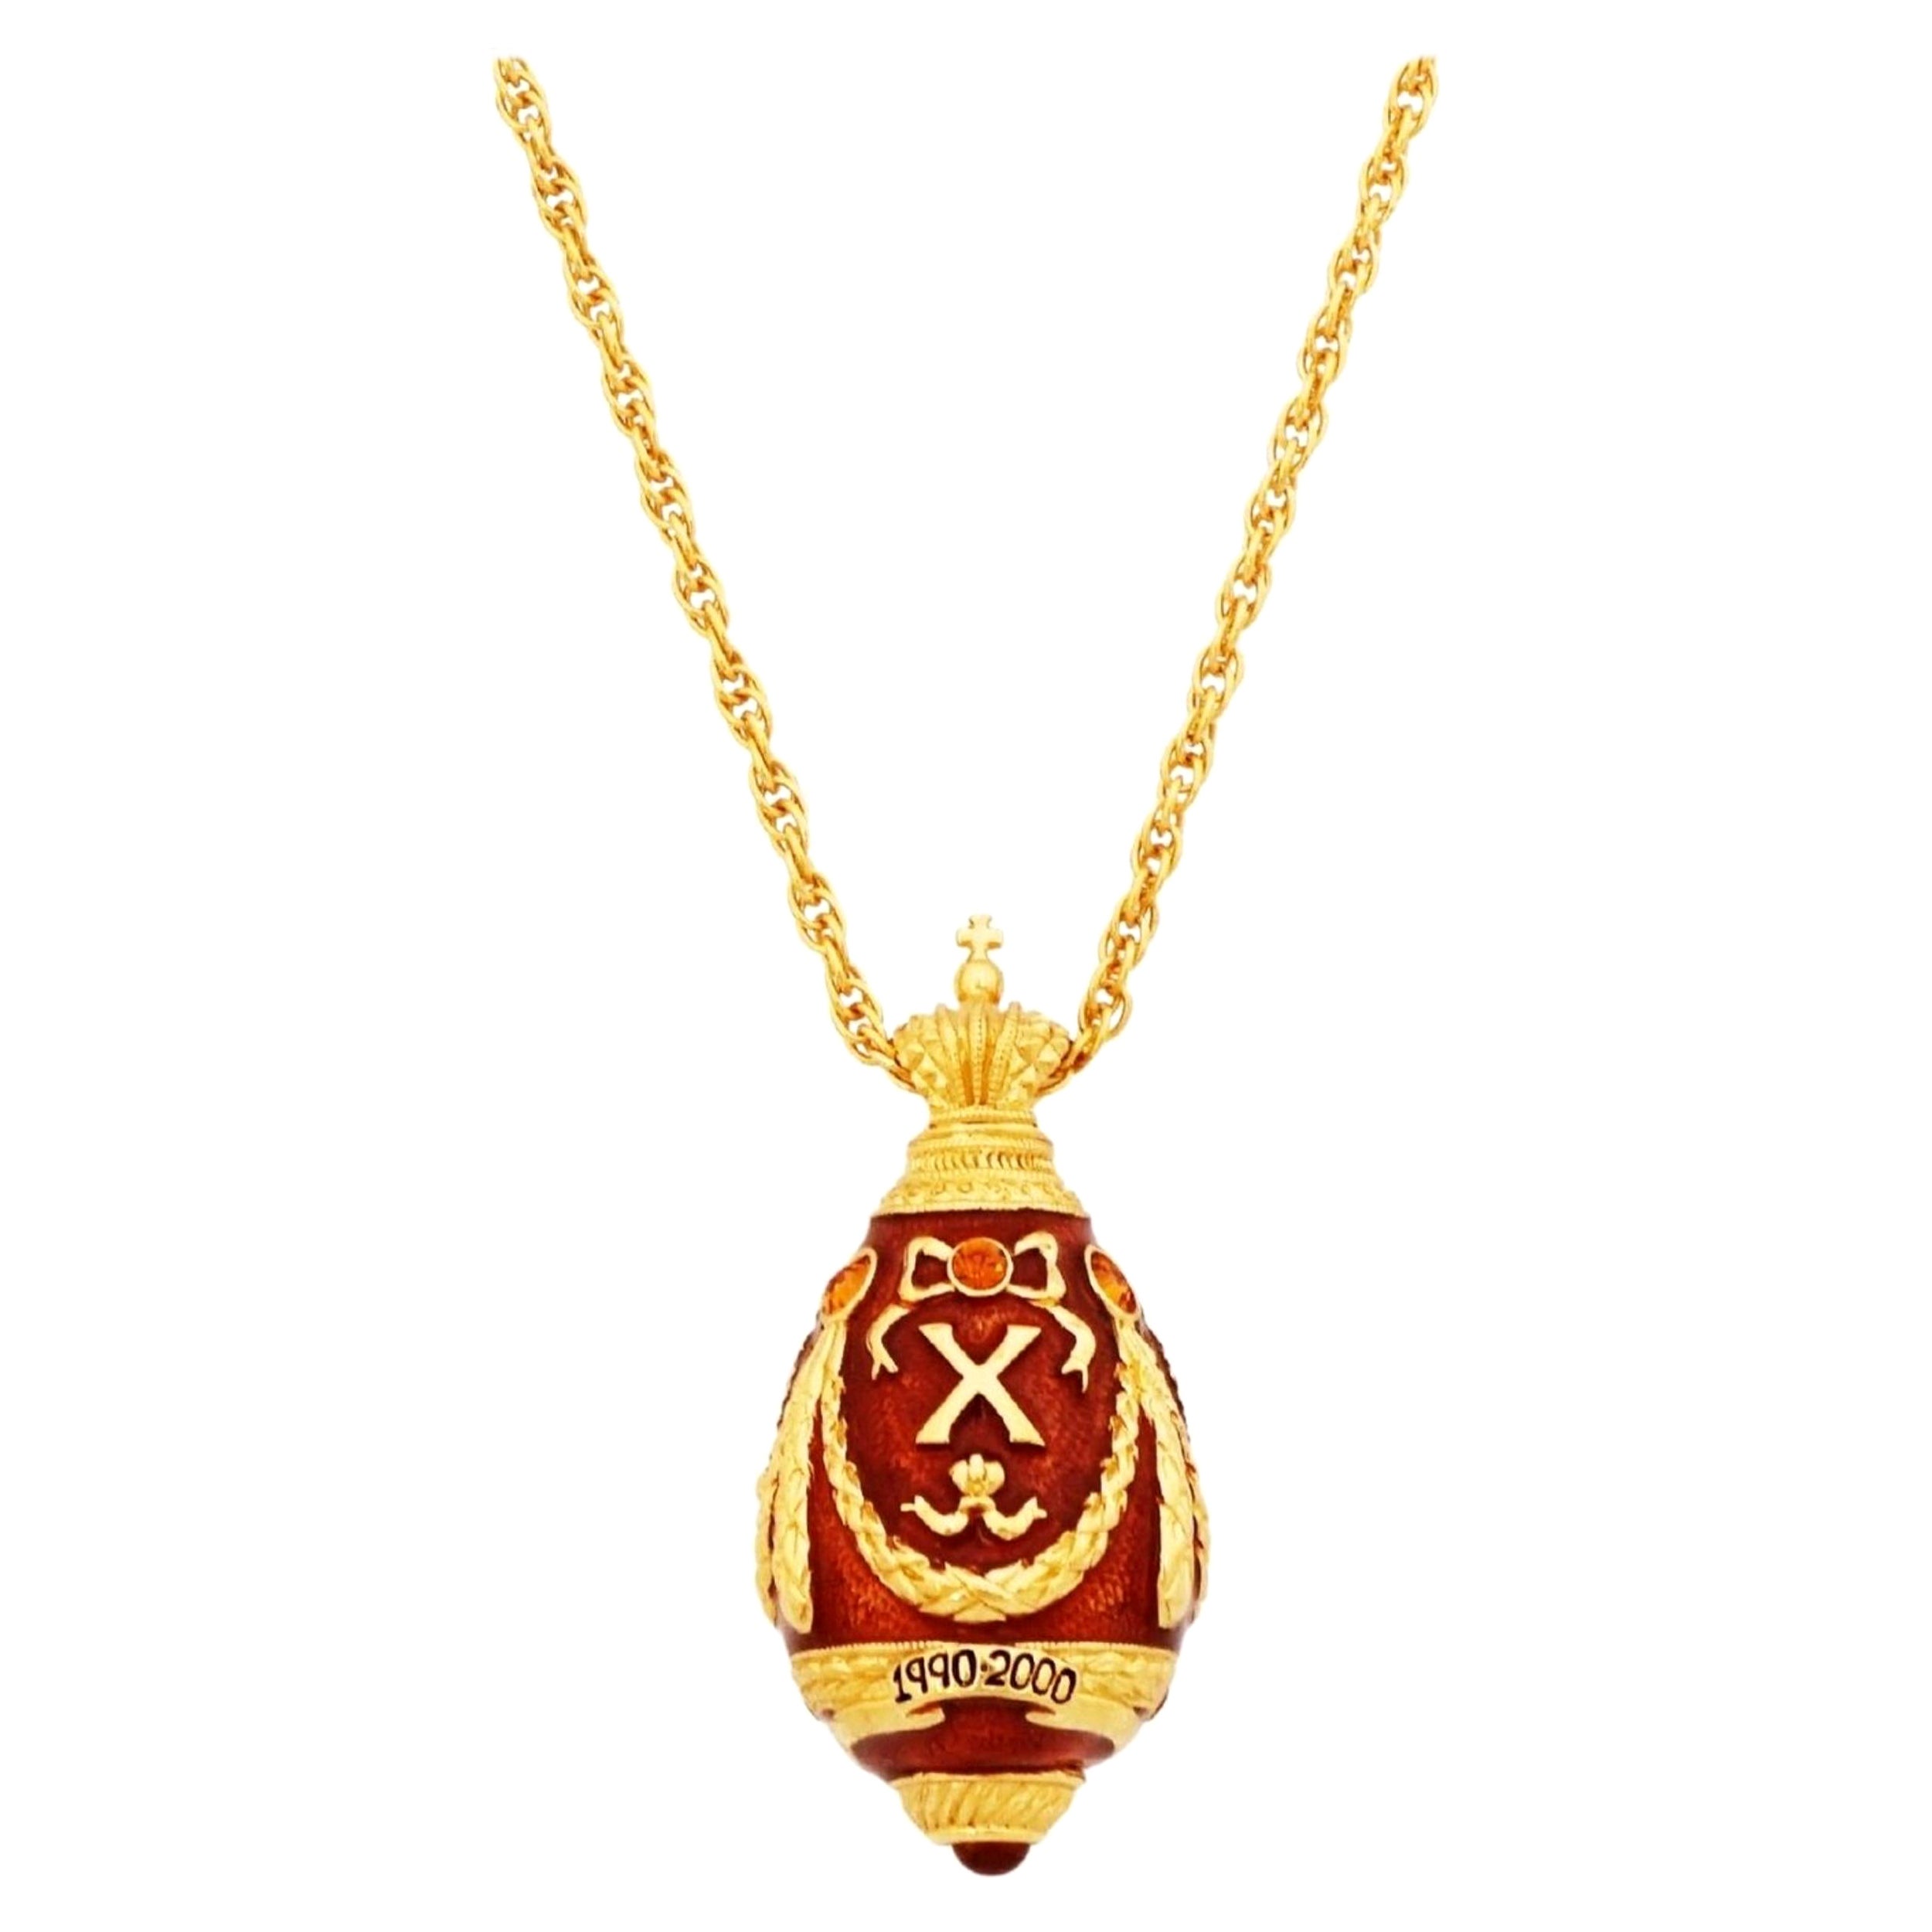 10th Anniversary Enamel Faberge Egg Pendant Necklace By Joan Rivers